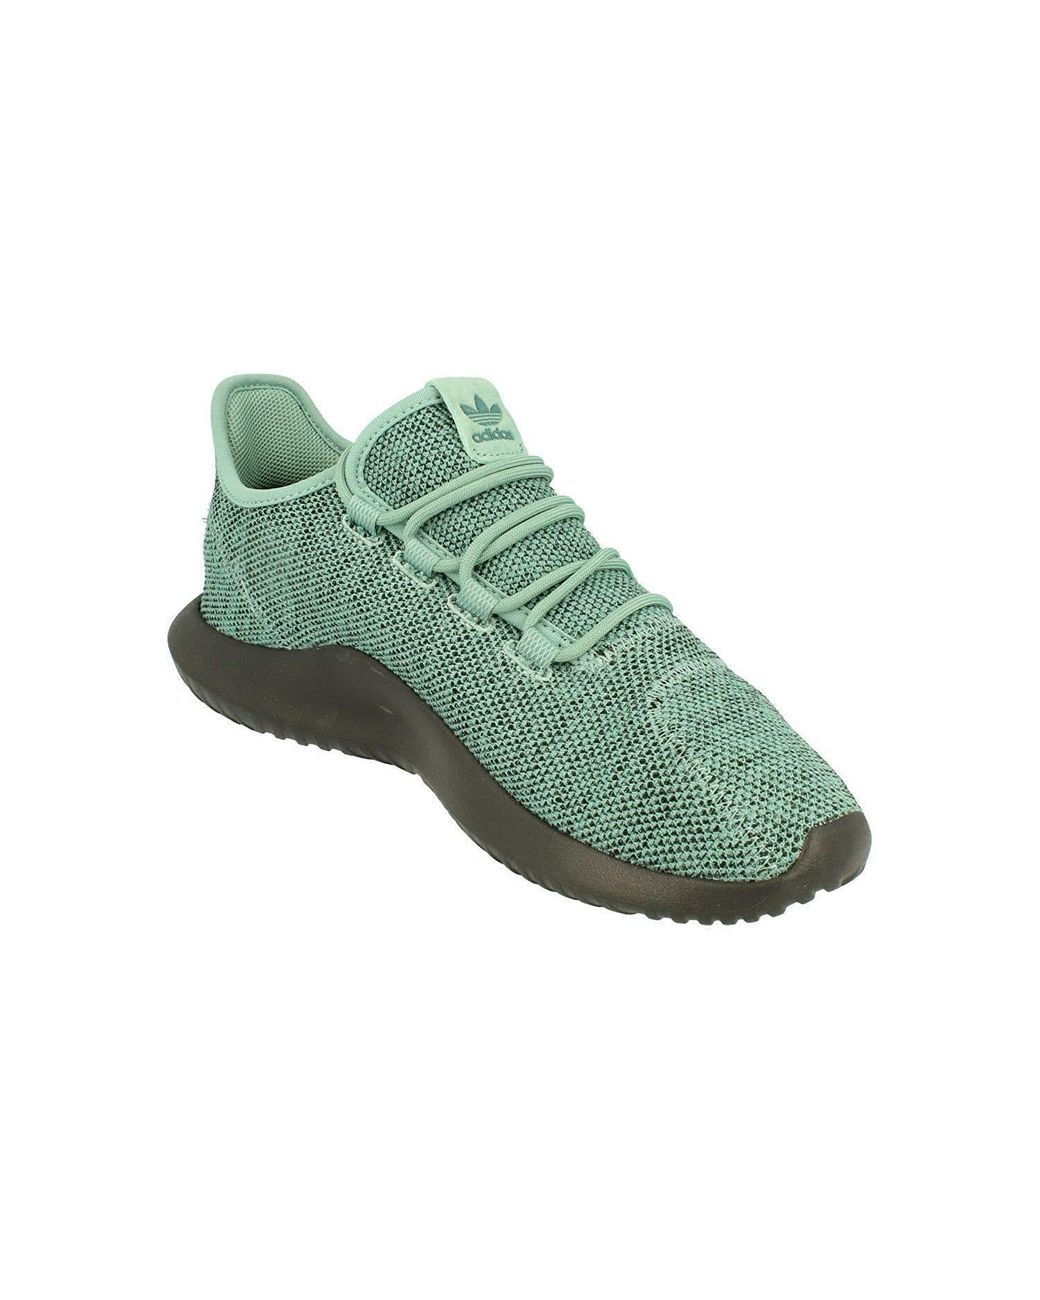 adidas Tubular Shadow S Vapste Trainers Ac8106 in Green for Men - Lyst